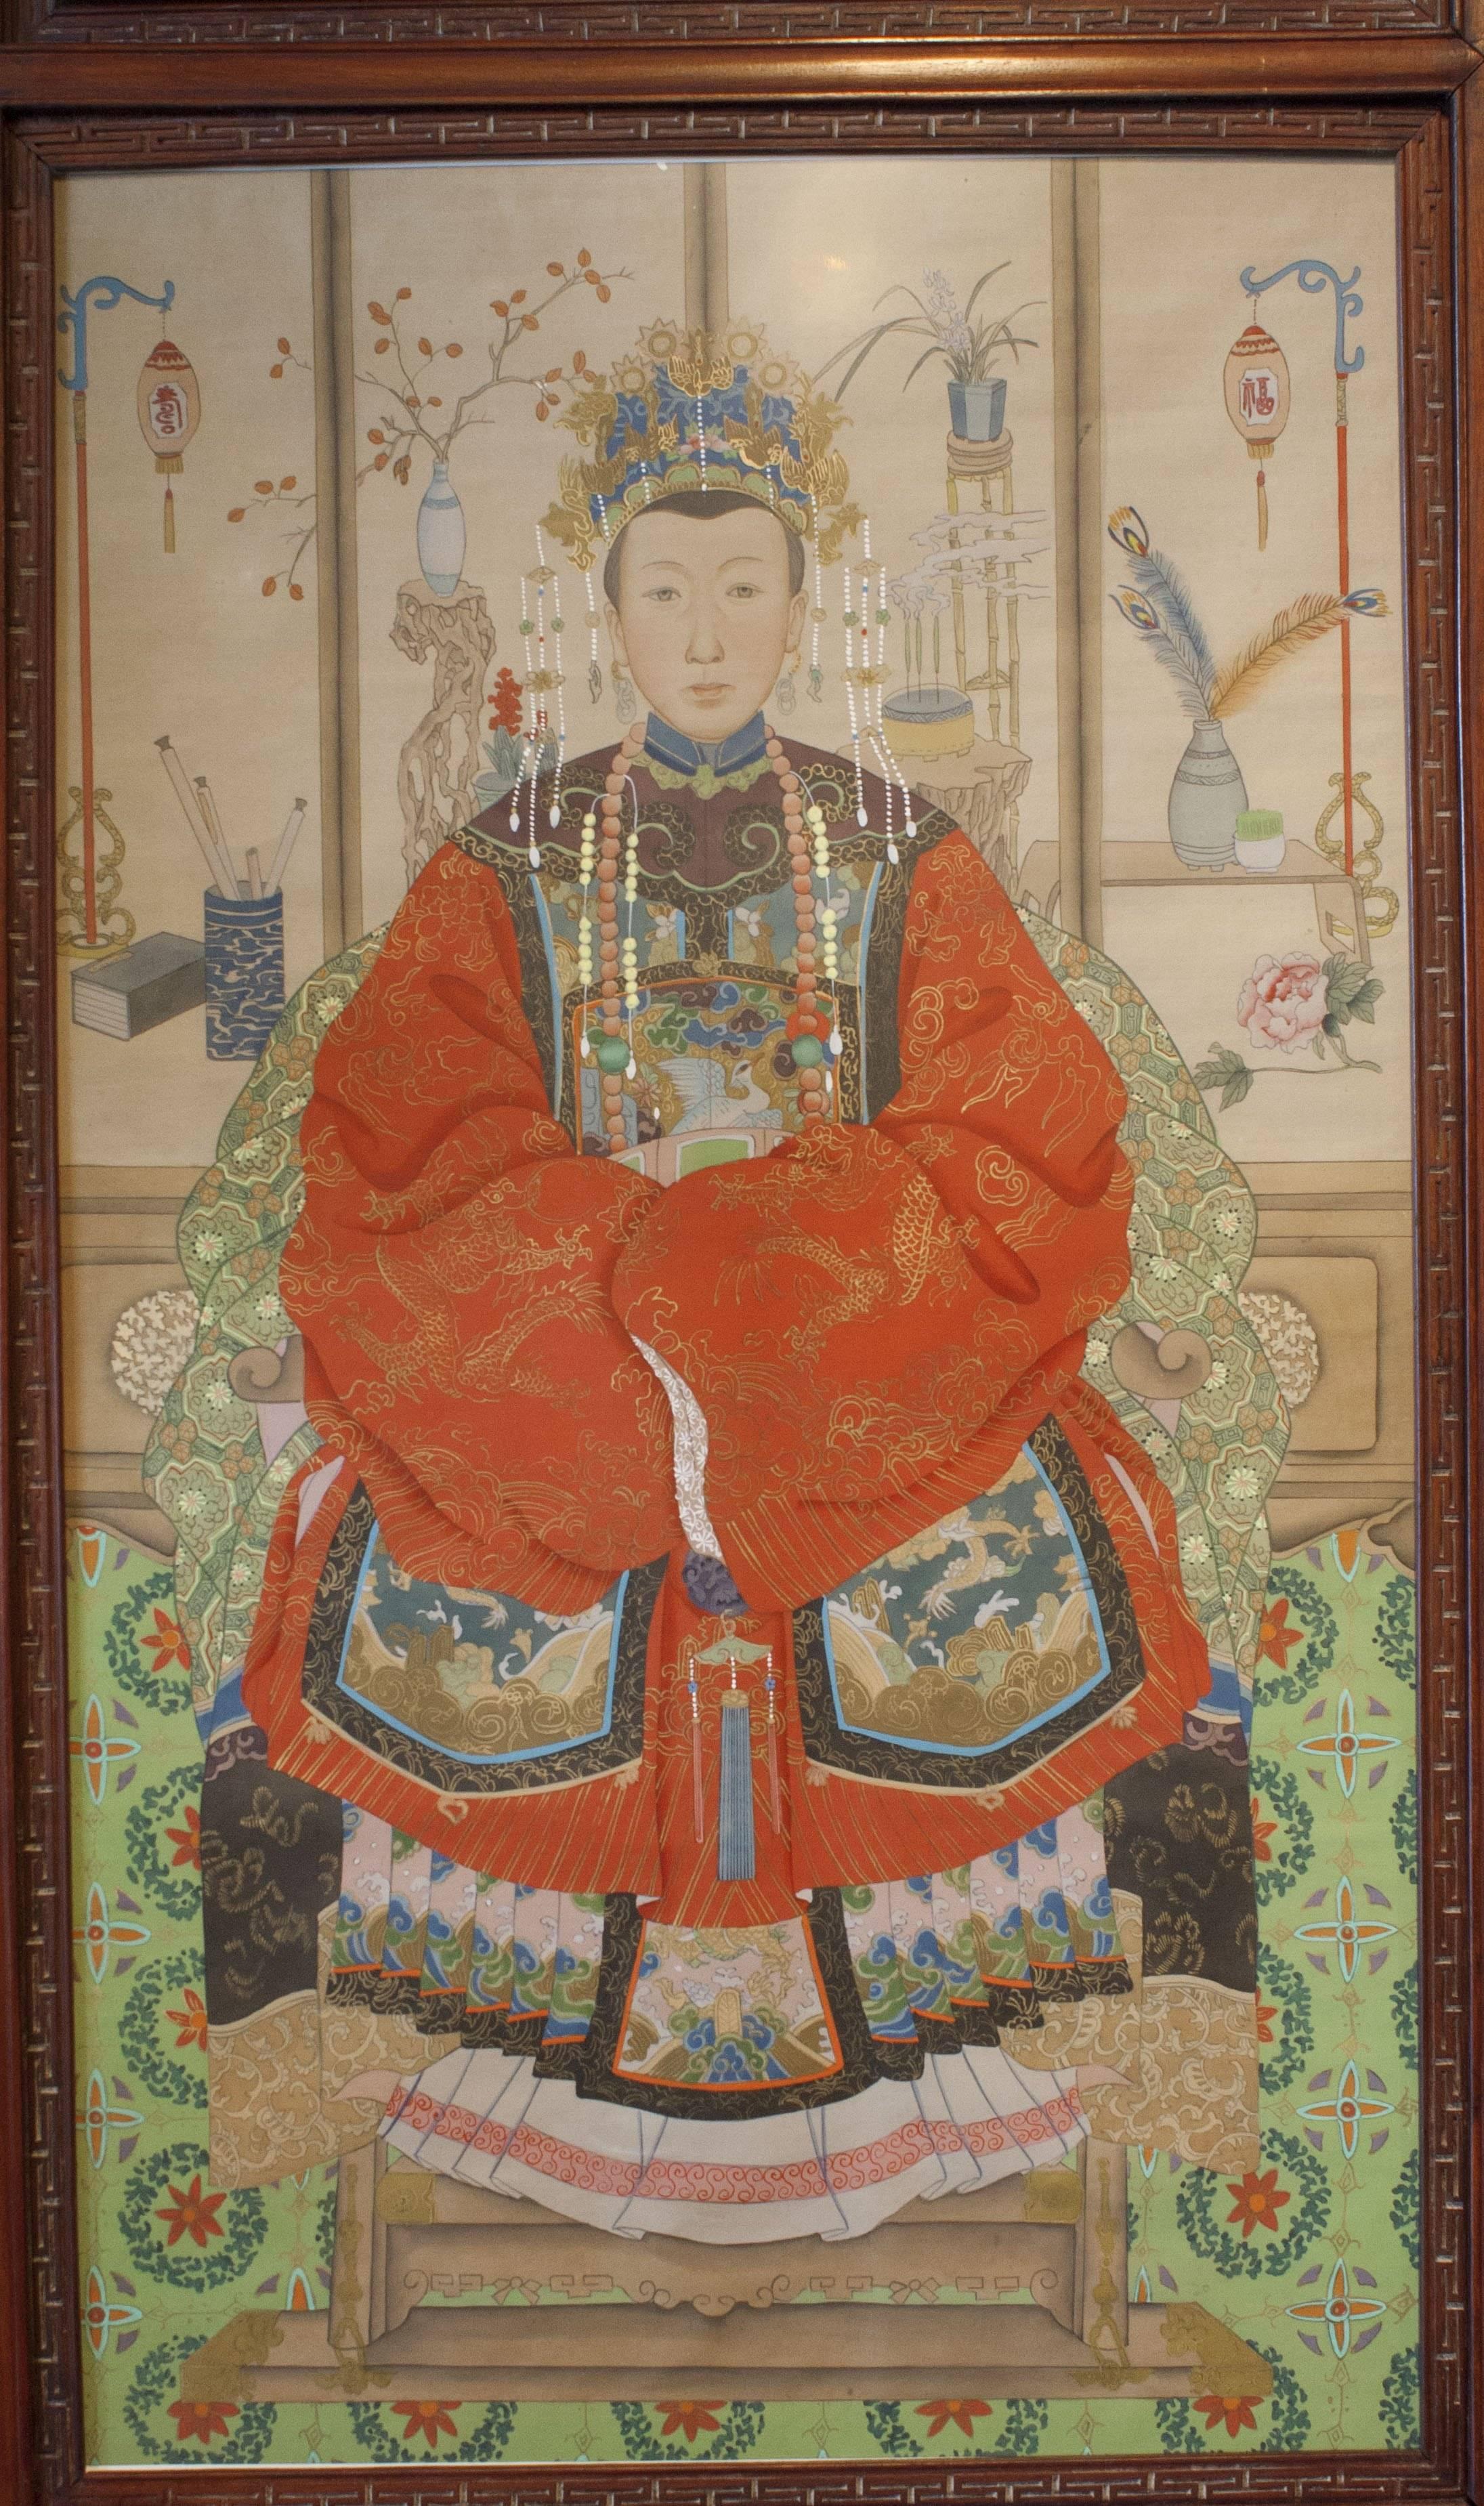 A pair of hand painted ancestor portraits in carved rosewood frames, with reverse glass painted accents.

Painted during China's Republic Period (1912-1949), the portraits are portrayals of members of the Qing Dynasty Imperial court in their full